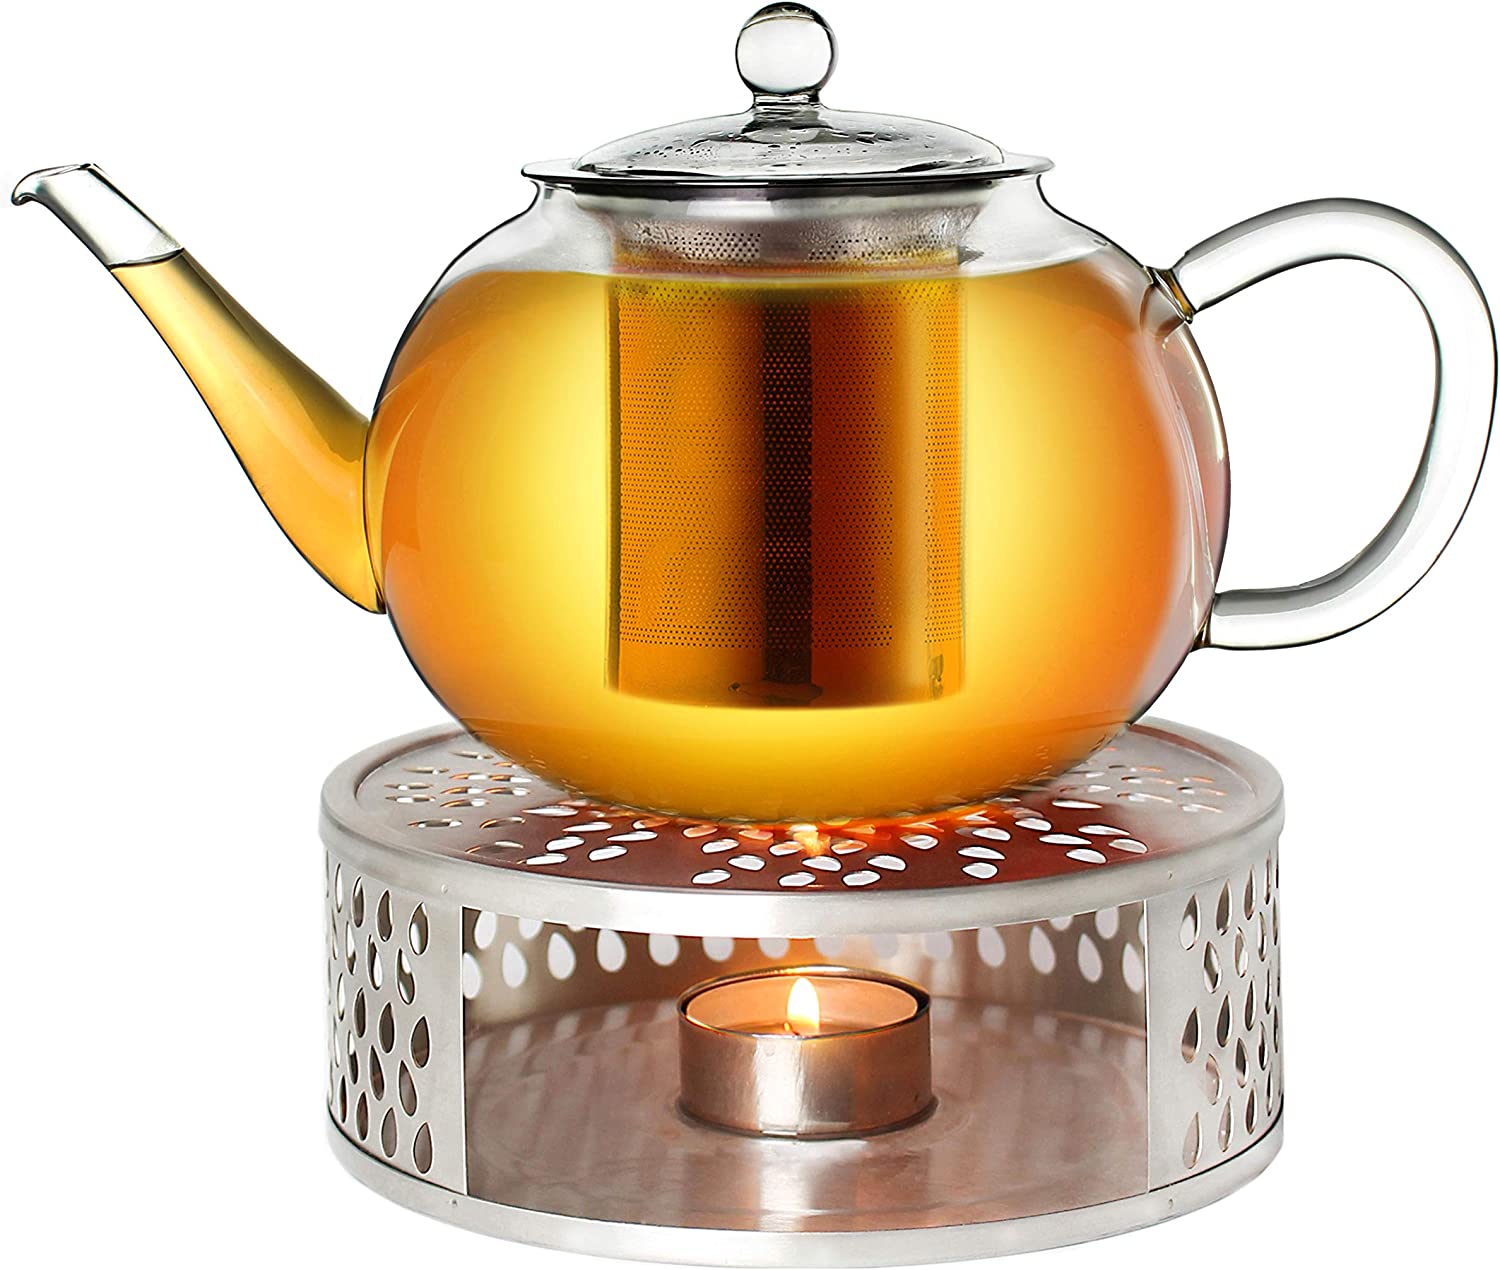 Creano Glass Teapot 800 ml 3-Part Tea Maker with Integrated Stainless Steel Strainer and Glass Lid.